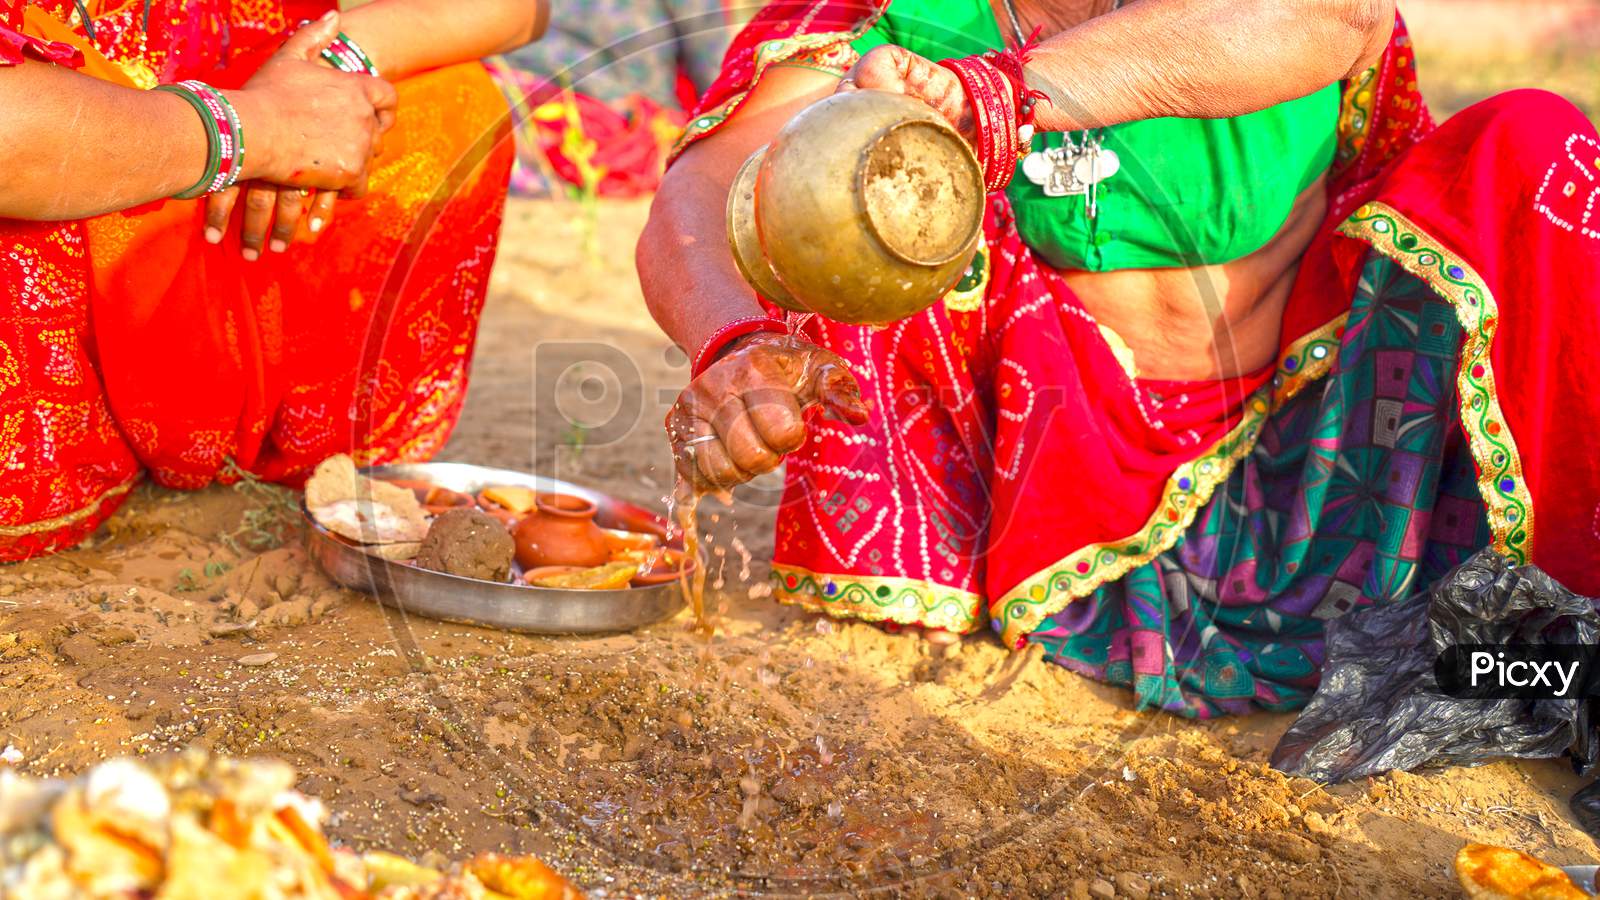 Offerings In Hinduism Ceremony. Two Bronze Mug With Holy Water To Offering God On Ground.